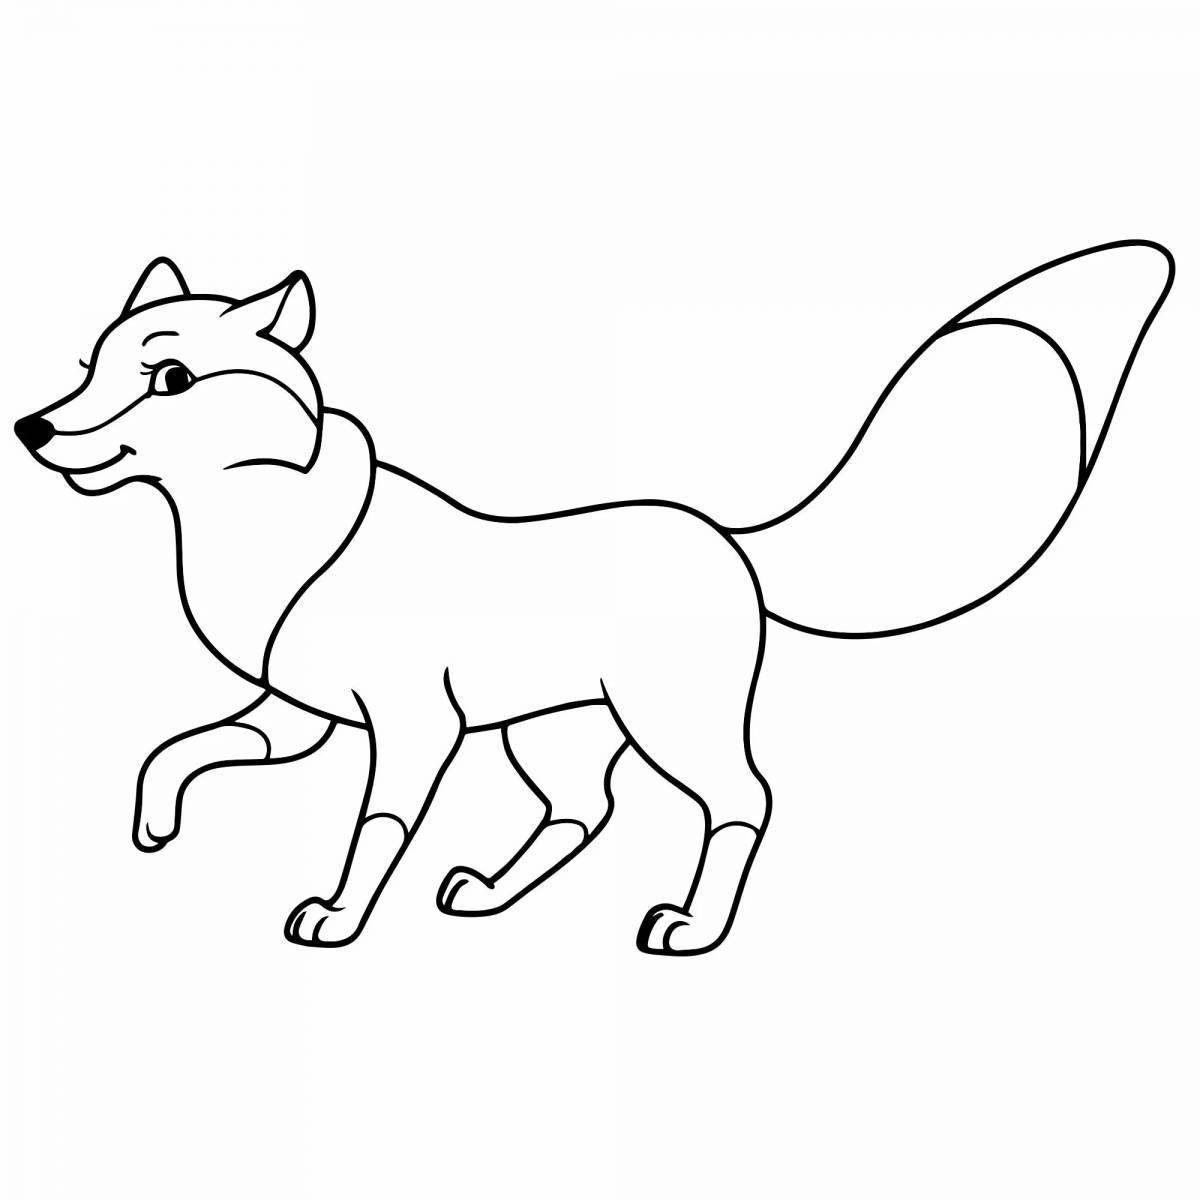 Exotic fox coloring book for kids